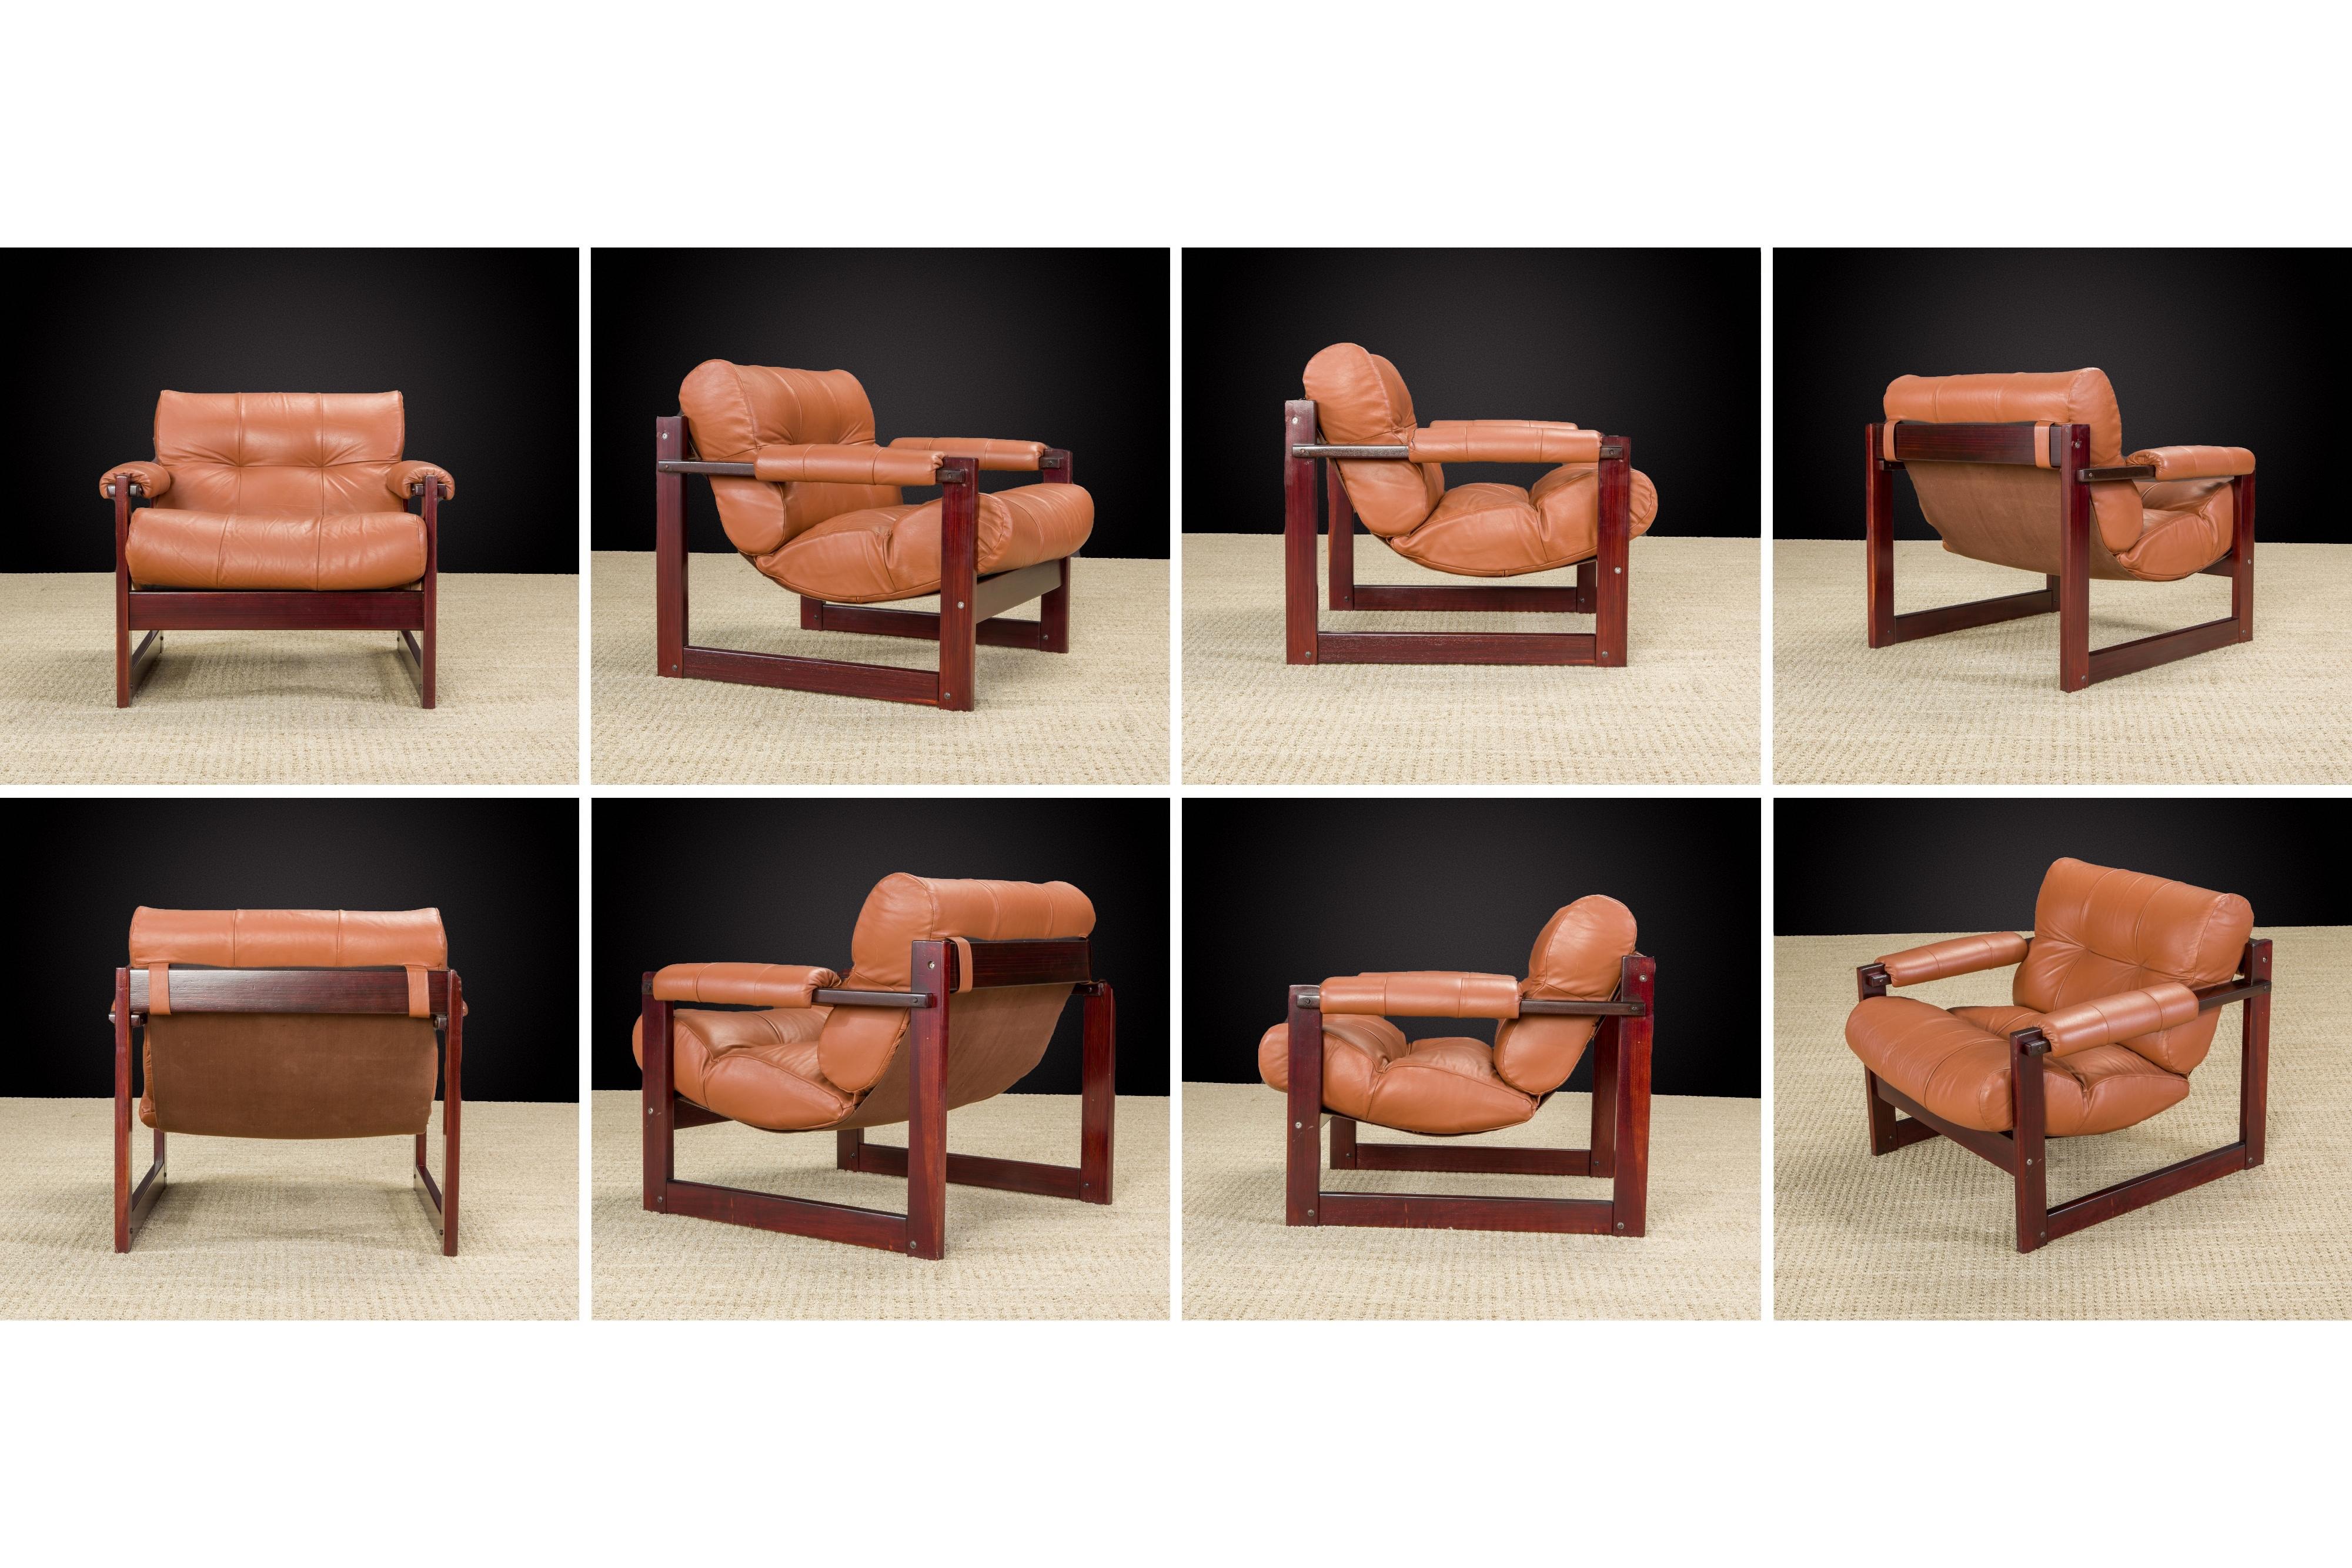 Percival Lafer 'S-1' Rosewood and Leather Living Room Set, Brazil, 1976, Signed 7